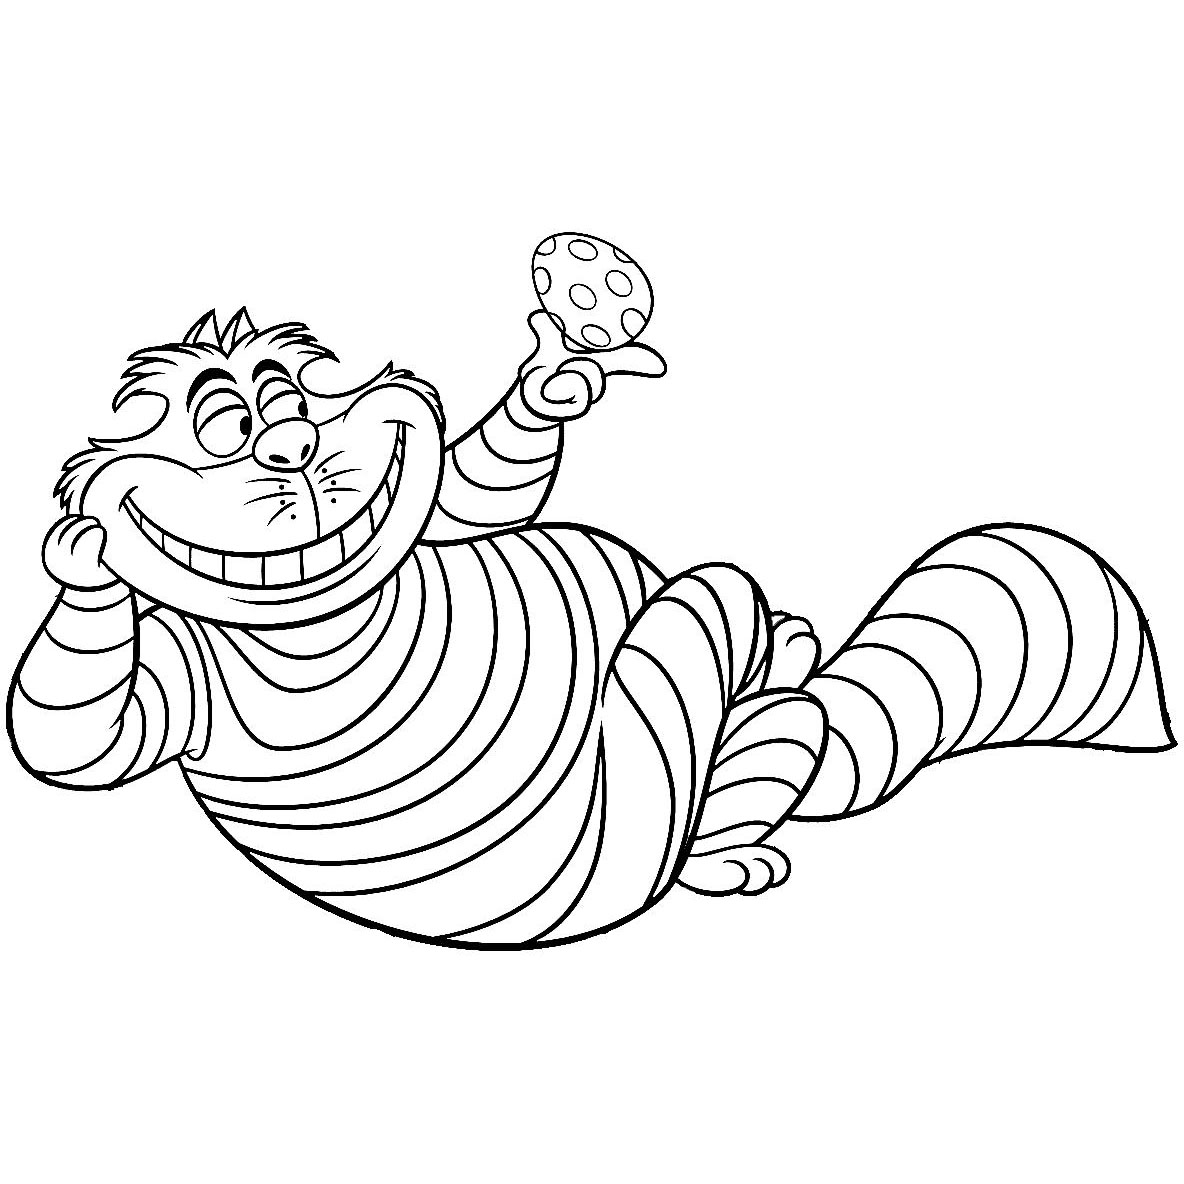 Free Disney Easter Coloring Pages Cheshirecat with Easter Egg printable